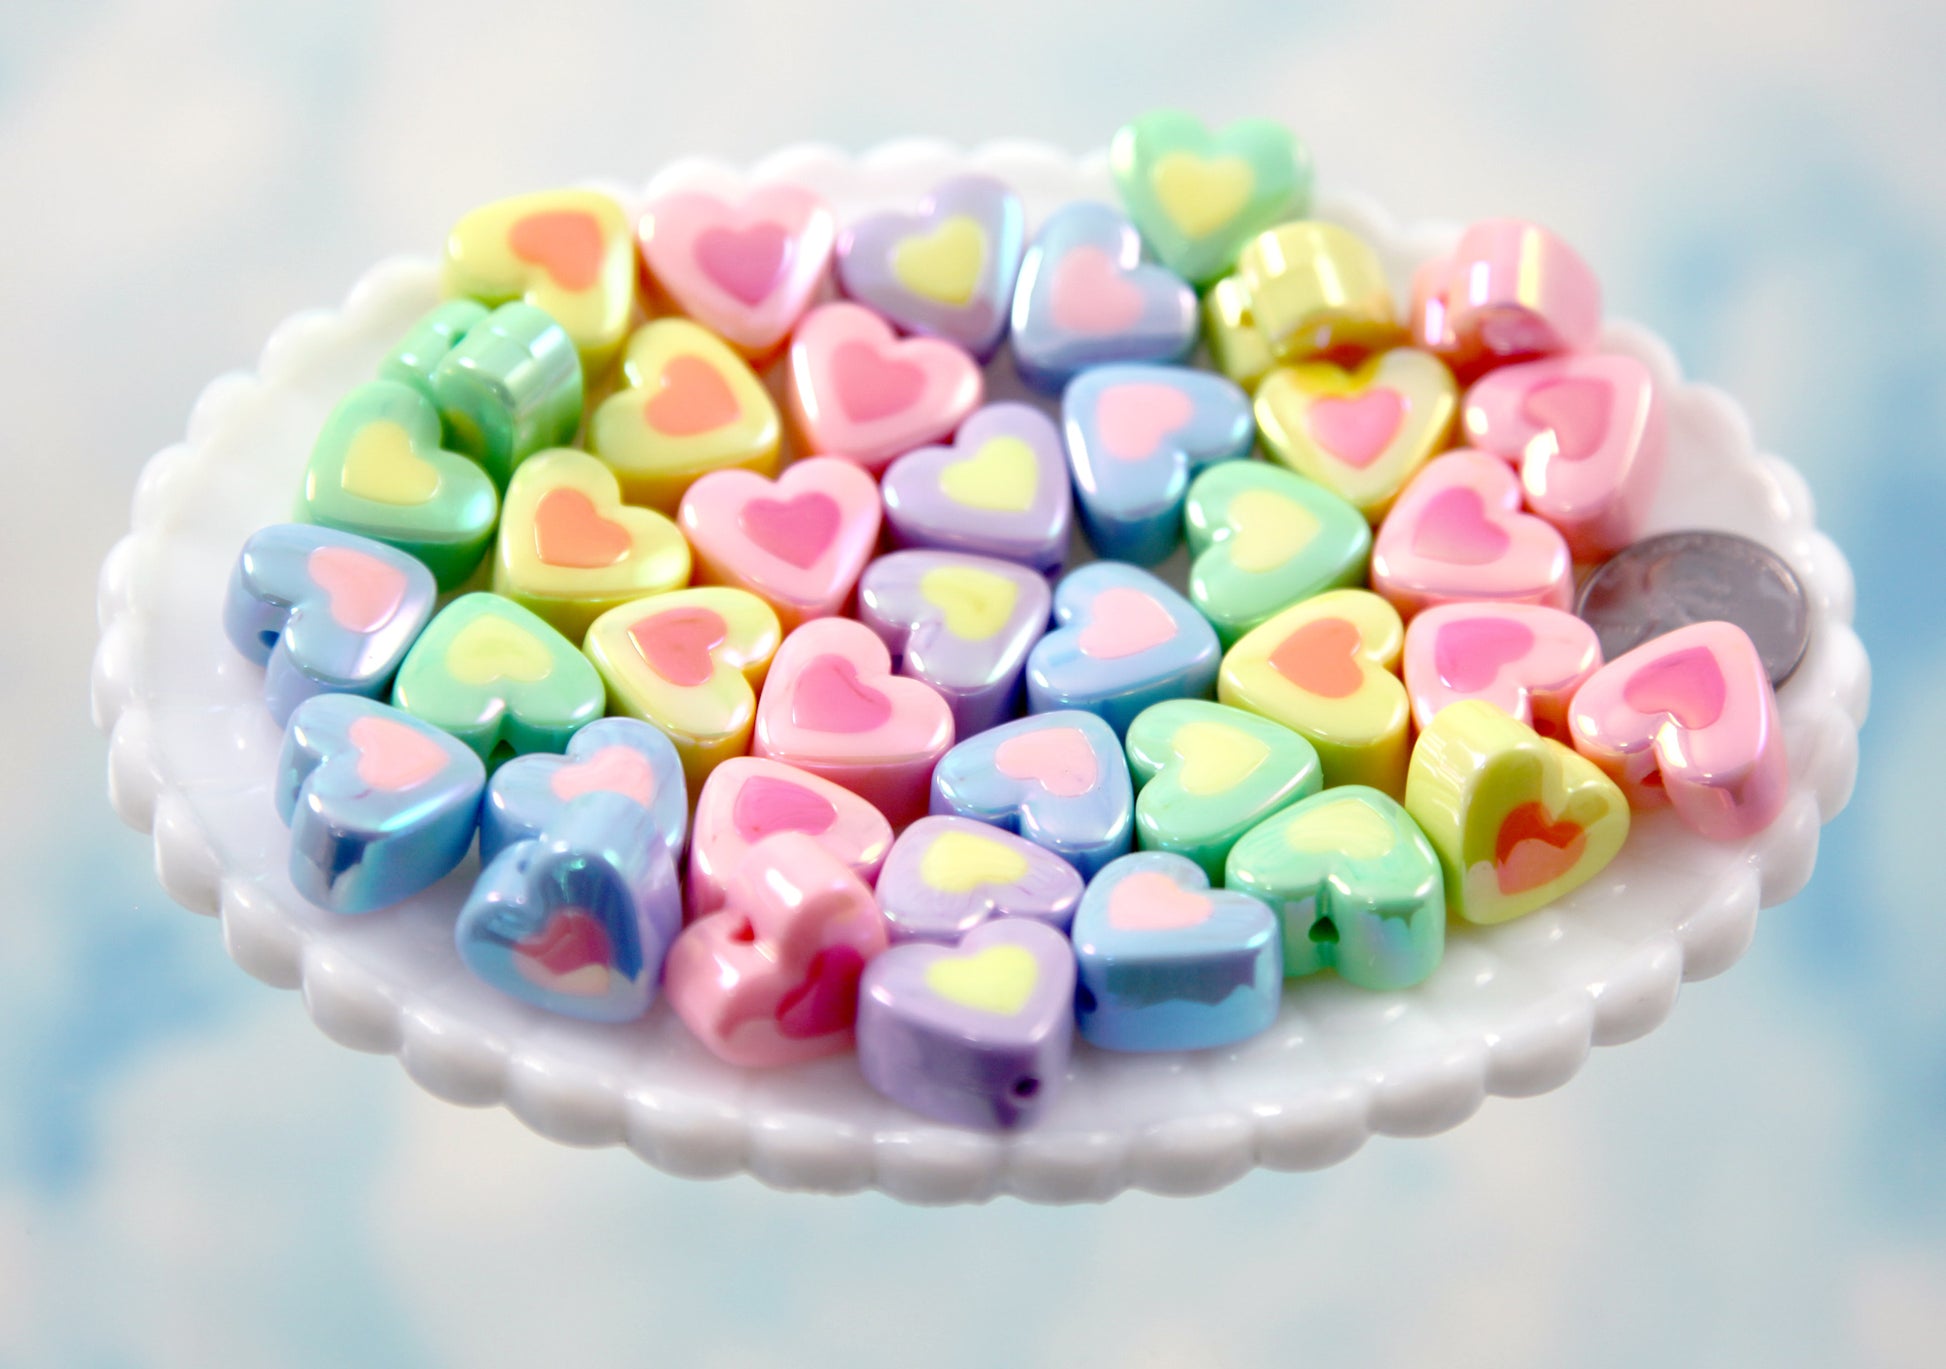 Heart Beads - 8mm Tiny AB Iridescent Pastel Hearts Resin or Acrylic Beads,  mixed color, small size beads - 200 pc set